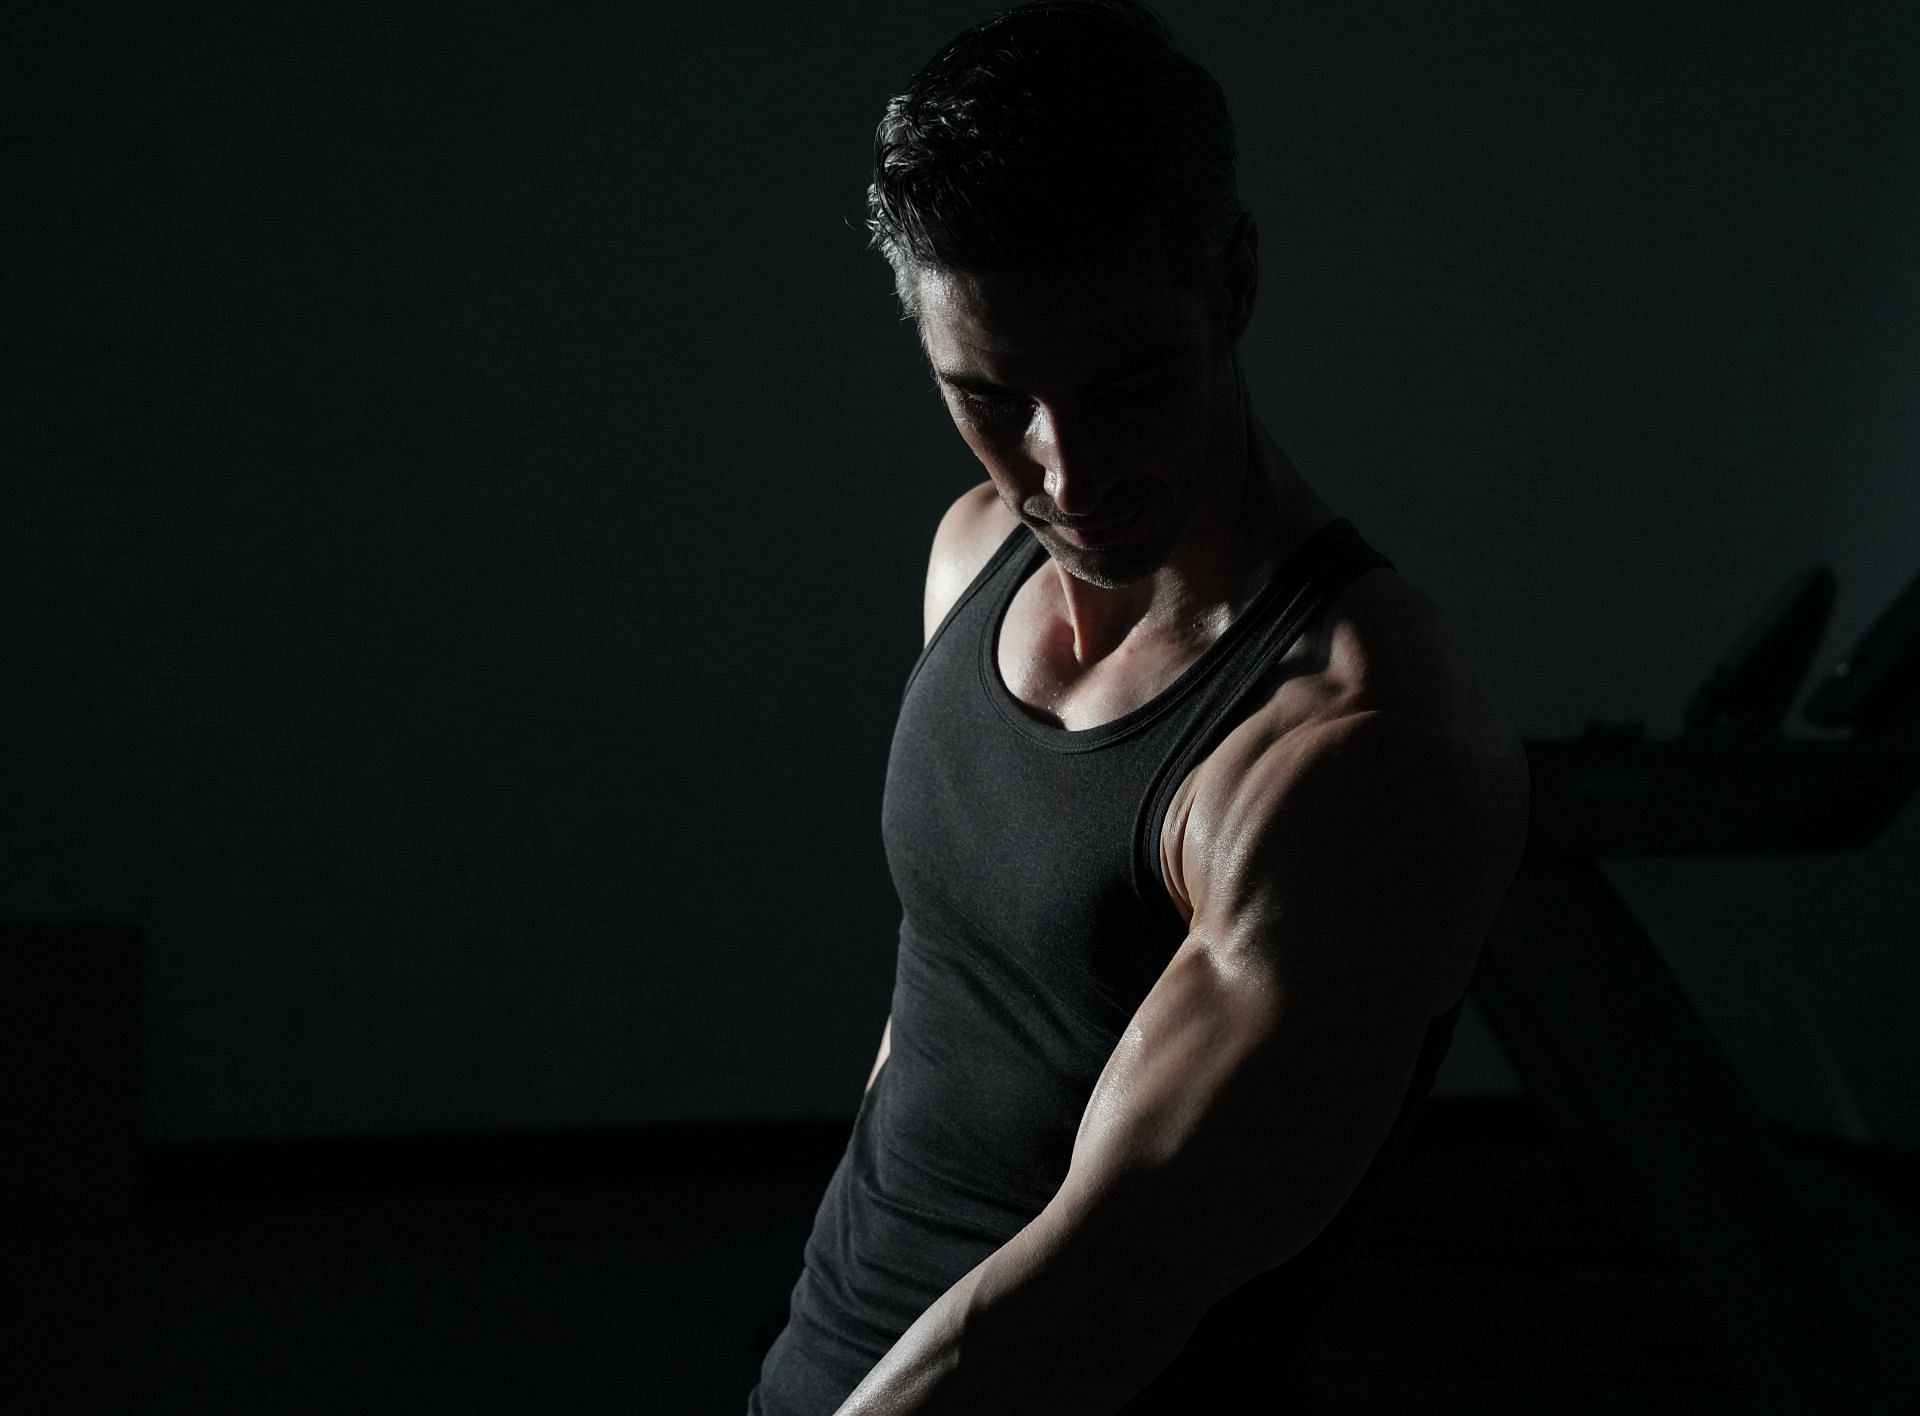 Build lean and muscular arms with these exercises. (Image via unsplash/Intenza Fitness)